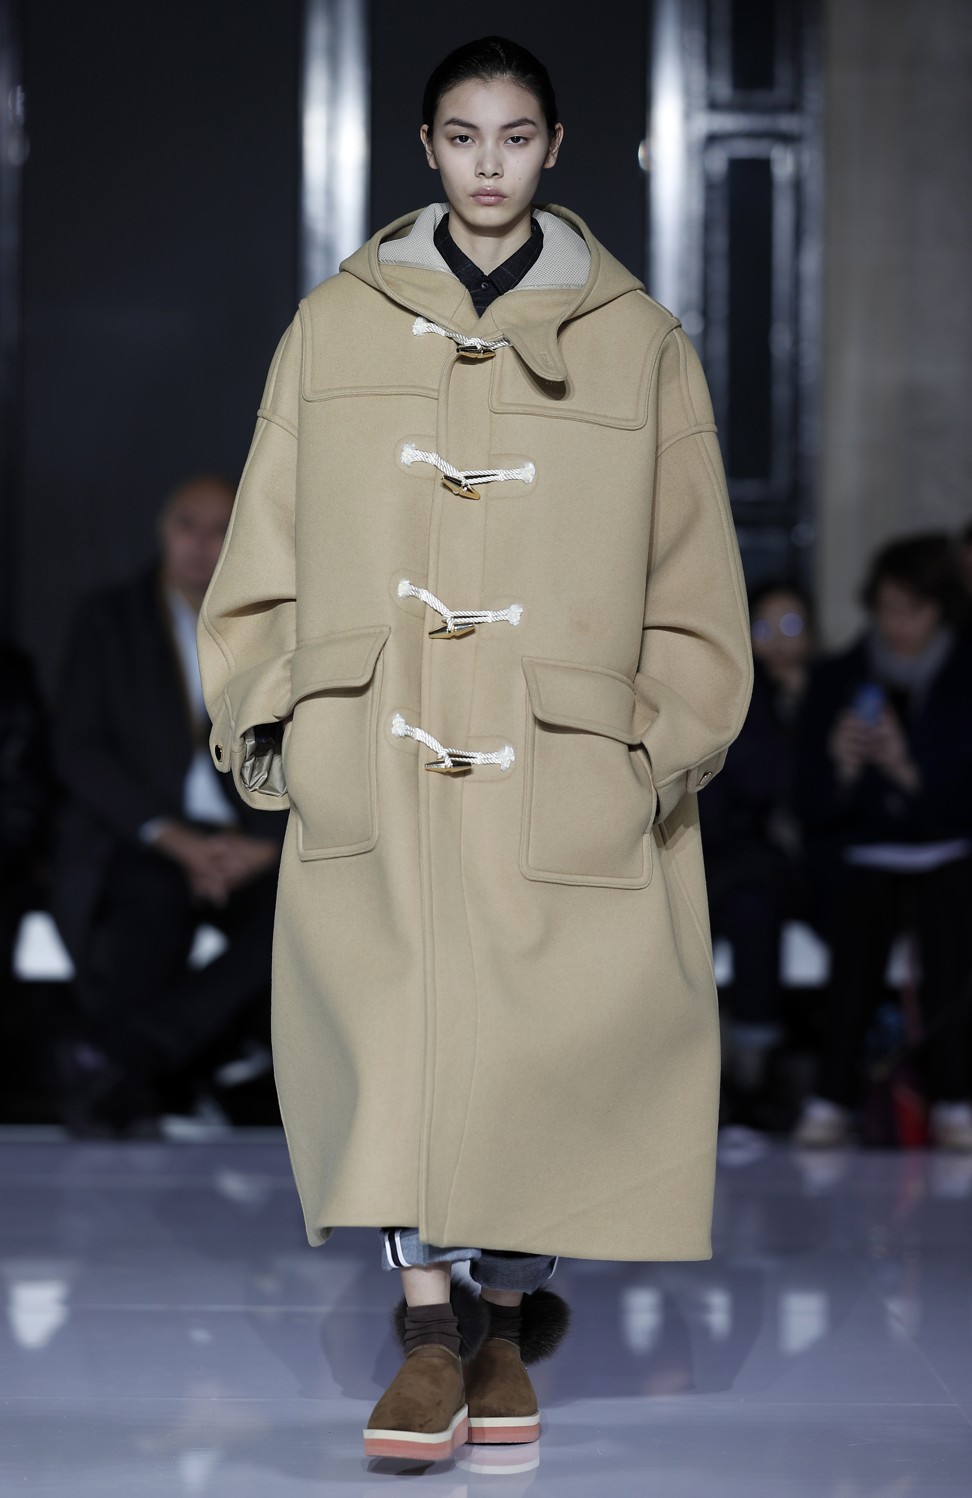 A model presents an oversized fawn duffel coat from Japanese designer Fumito Ganryu’s fall/winter 2019-20 men’s collection show at Paris Fashion Week on Tuesday. Photo: EPA-EFE